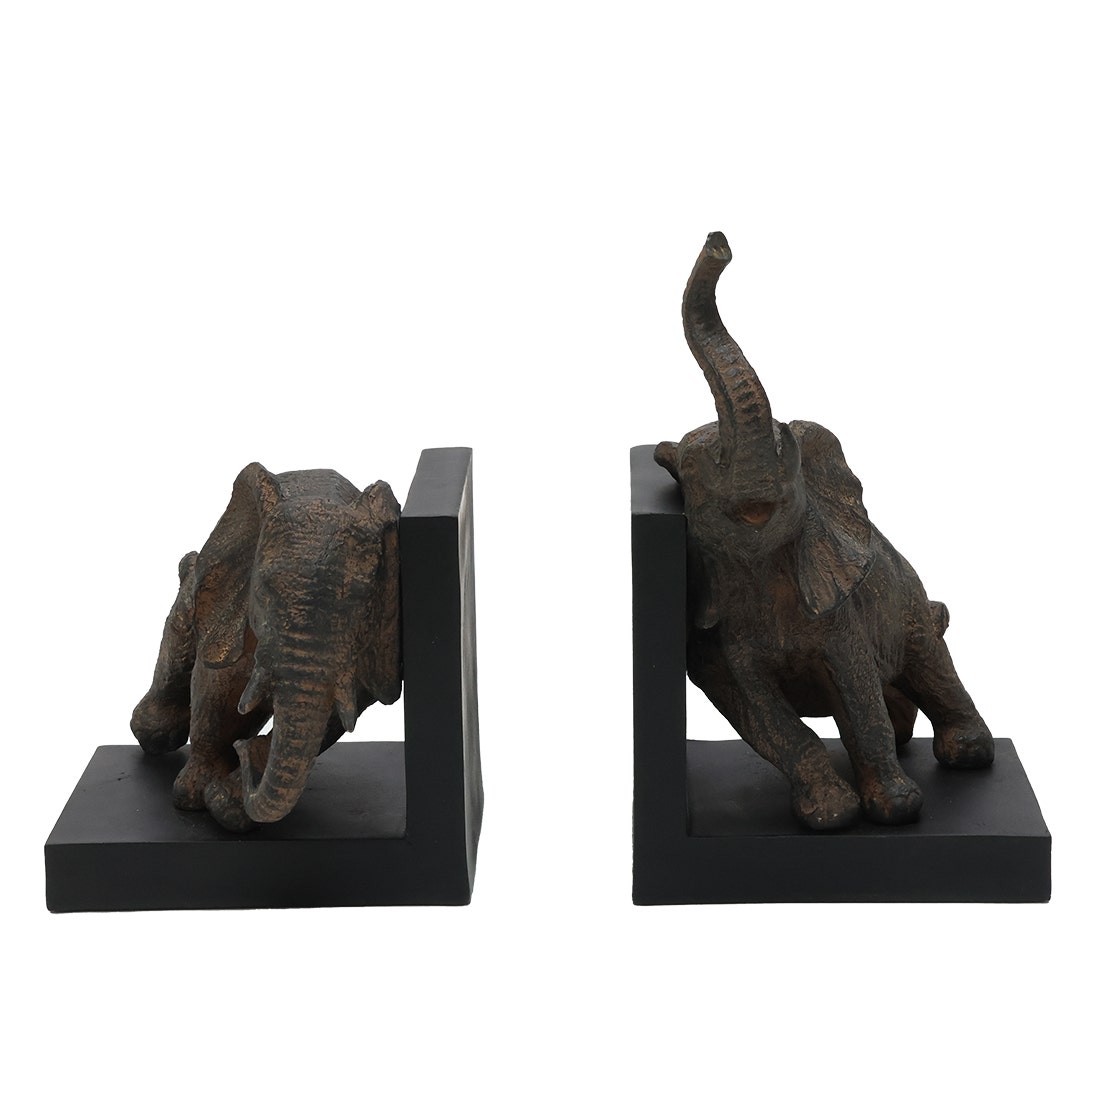 KD BOOKEND #51941 BROWN ELEPHANT Set of 2